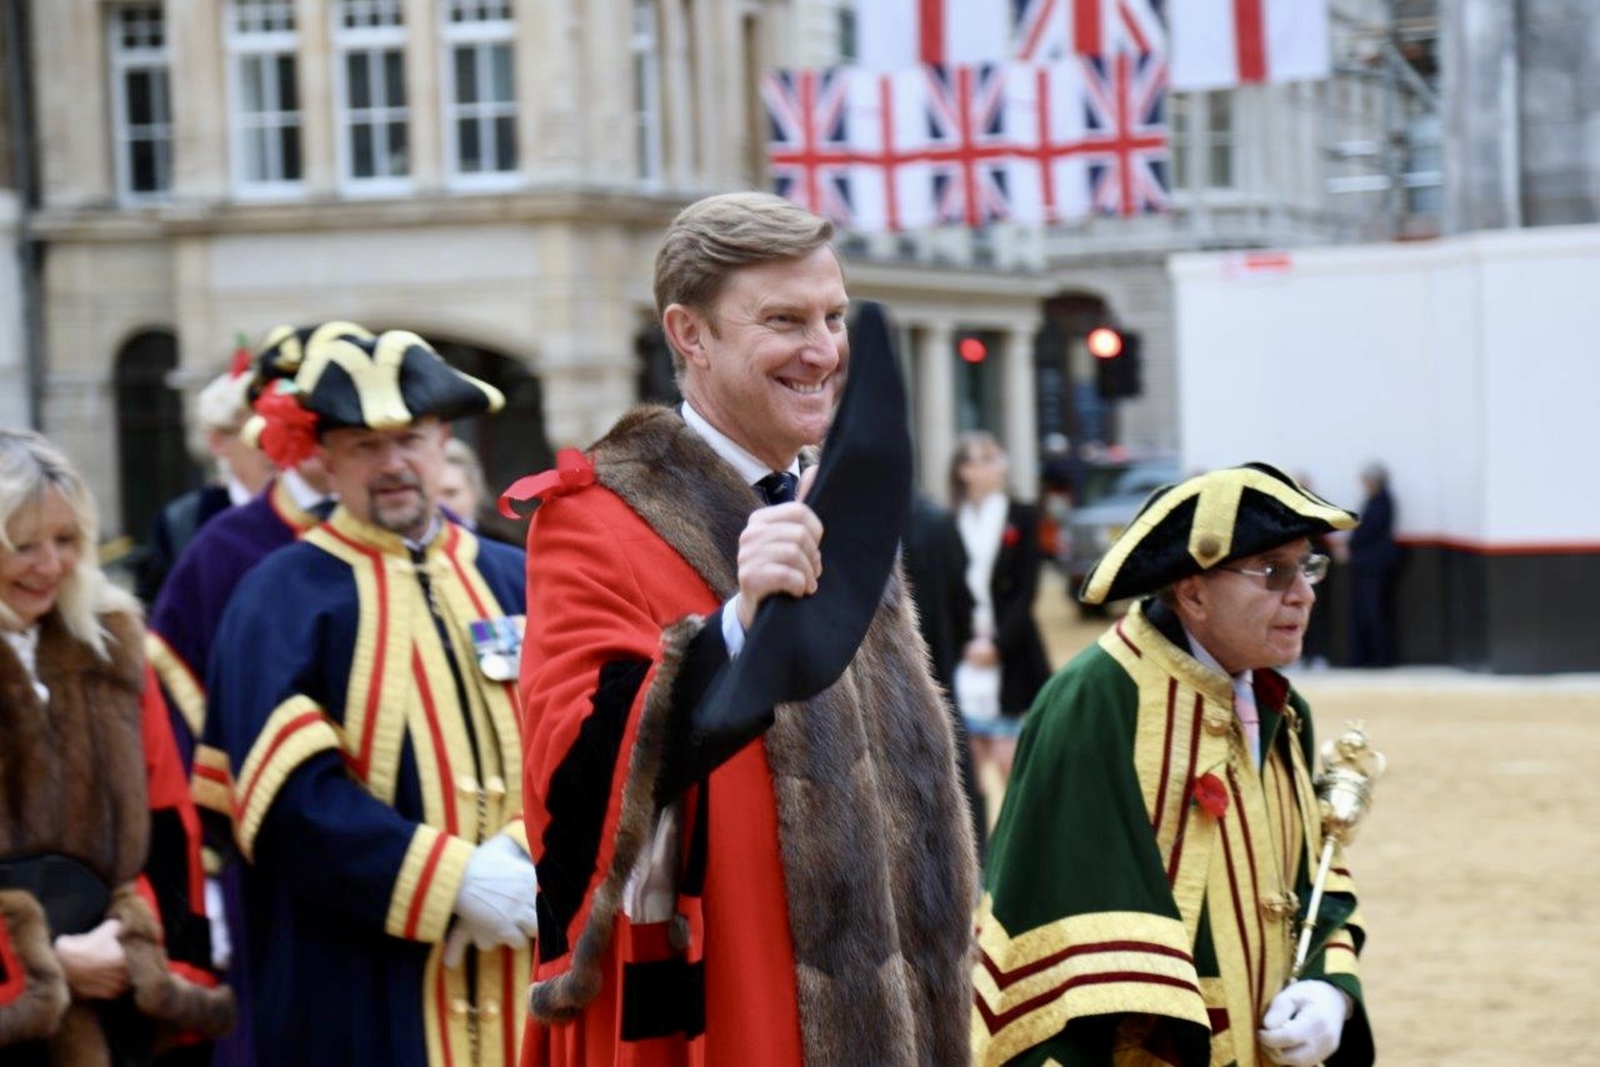 Alderman Robert Hughes-Penney  participating in  the 2021 Lord Mayor's Show